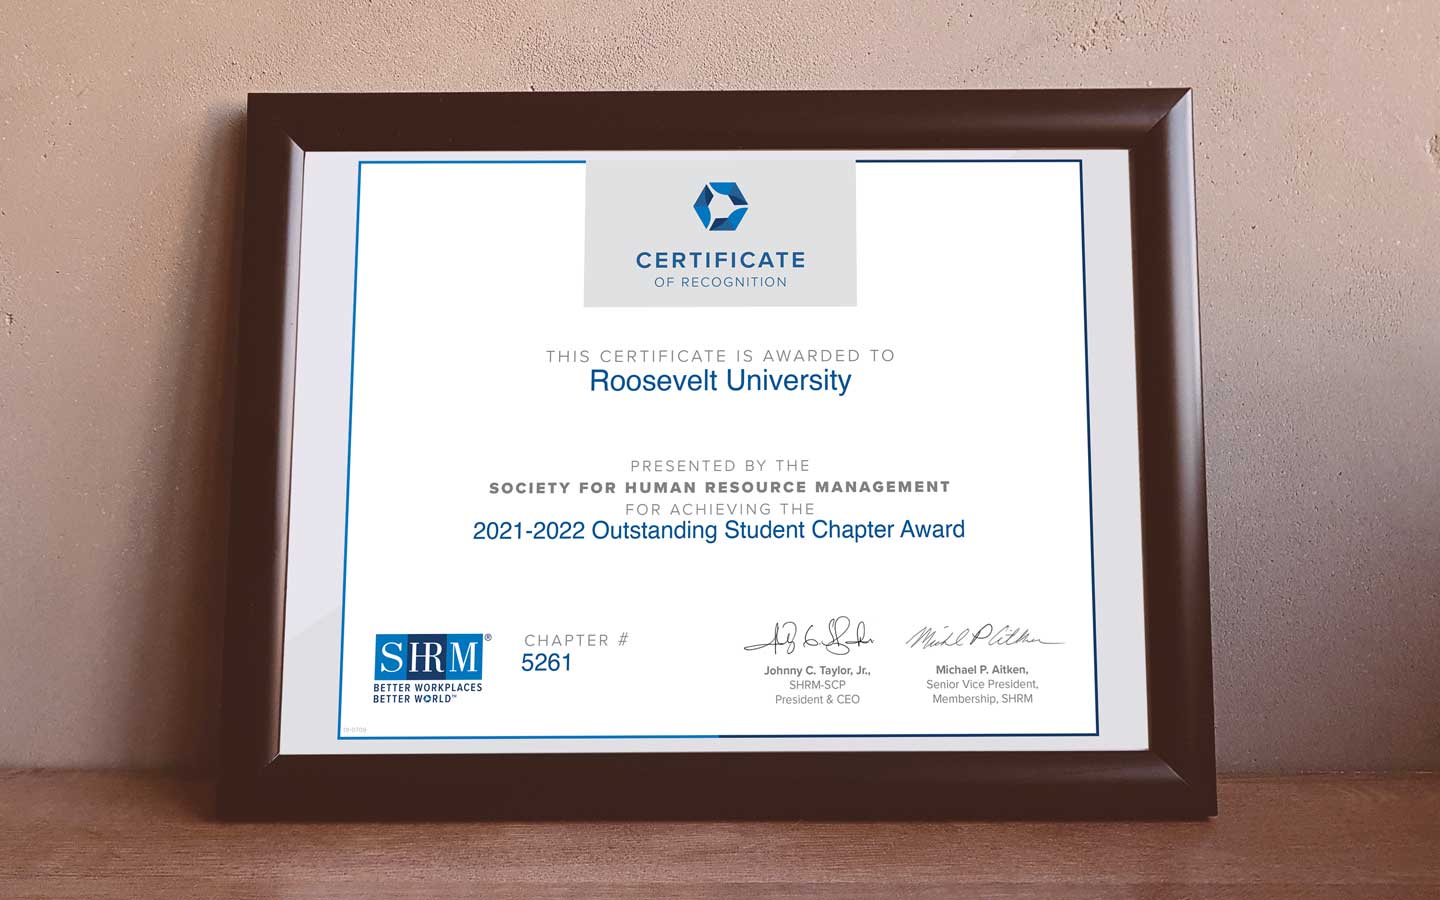 SHRM Student Chapter Certificate